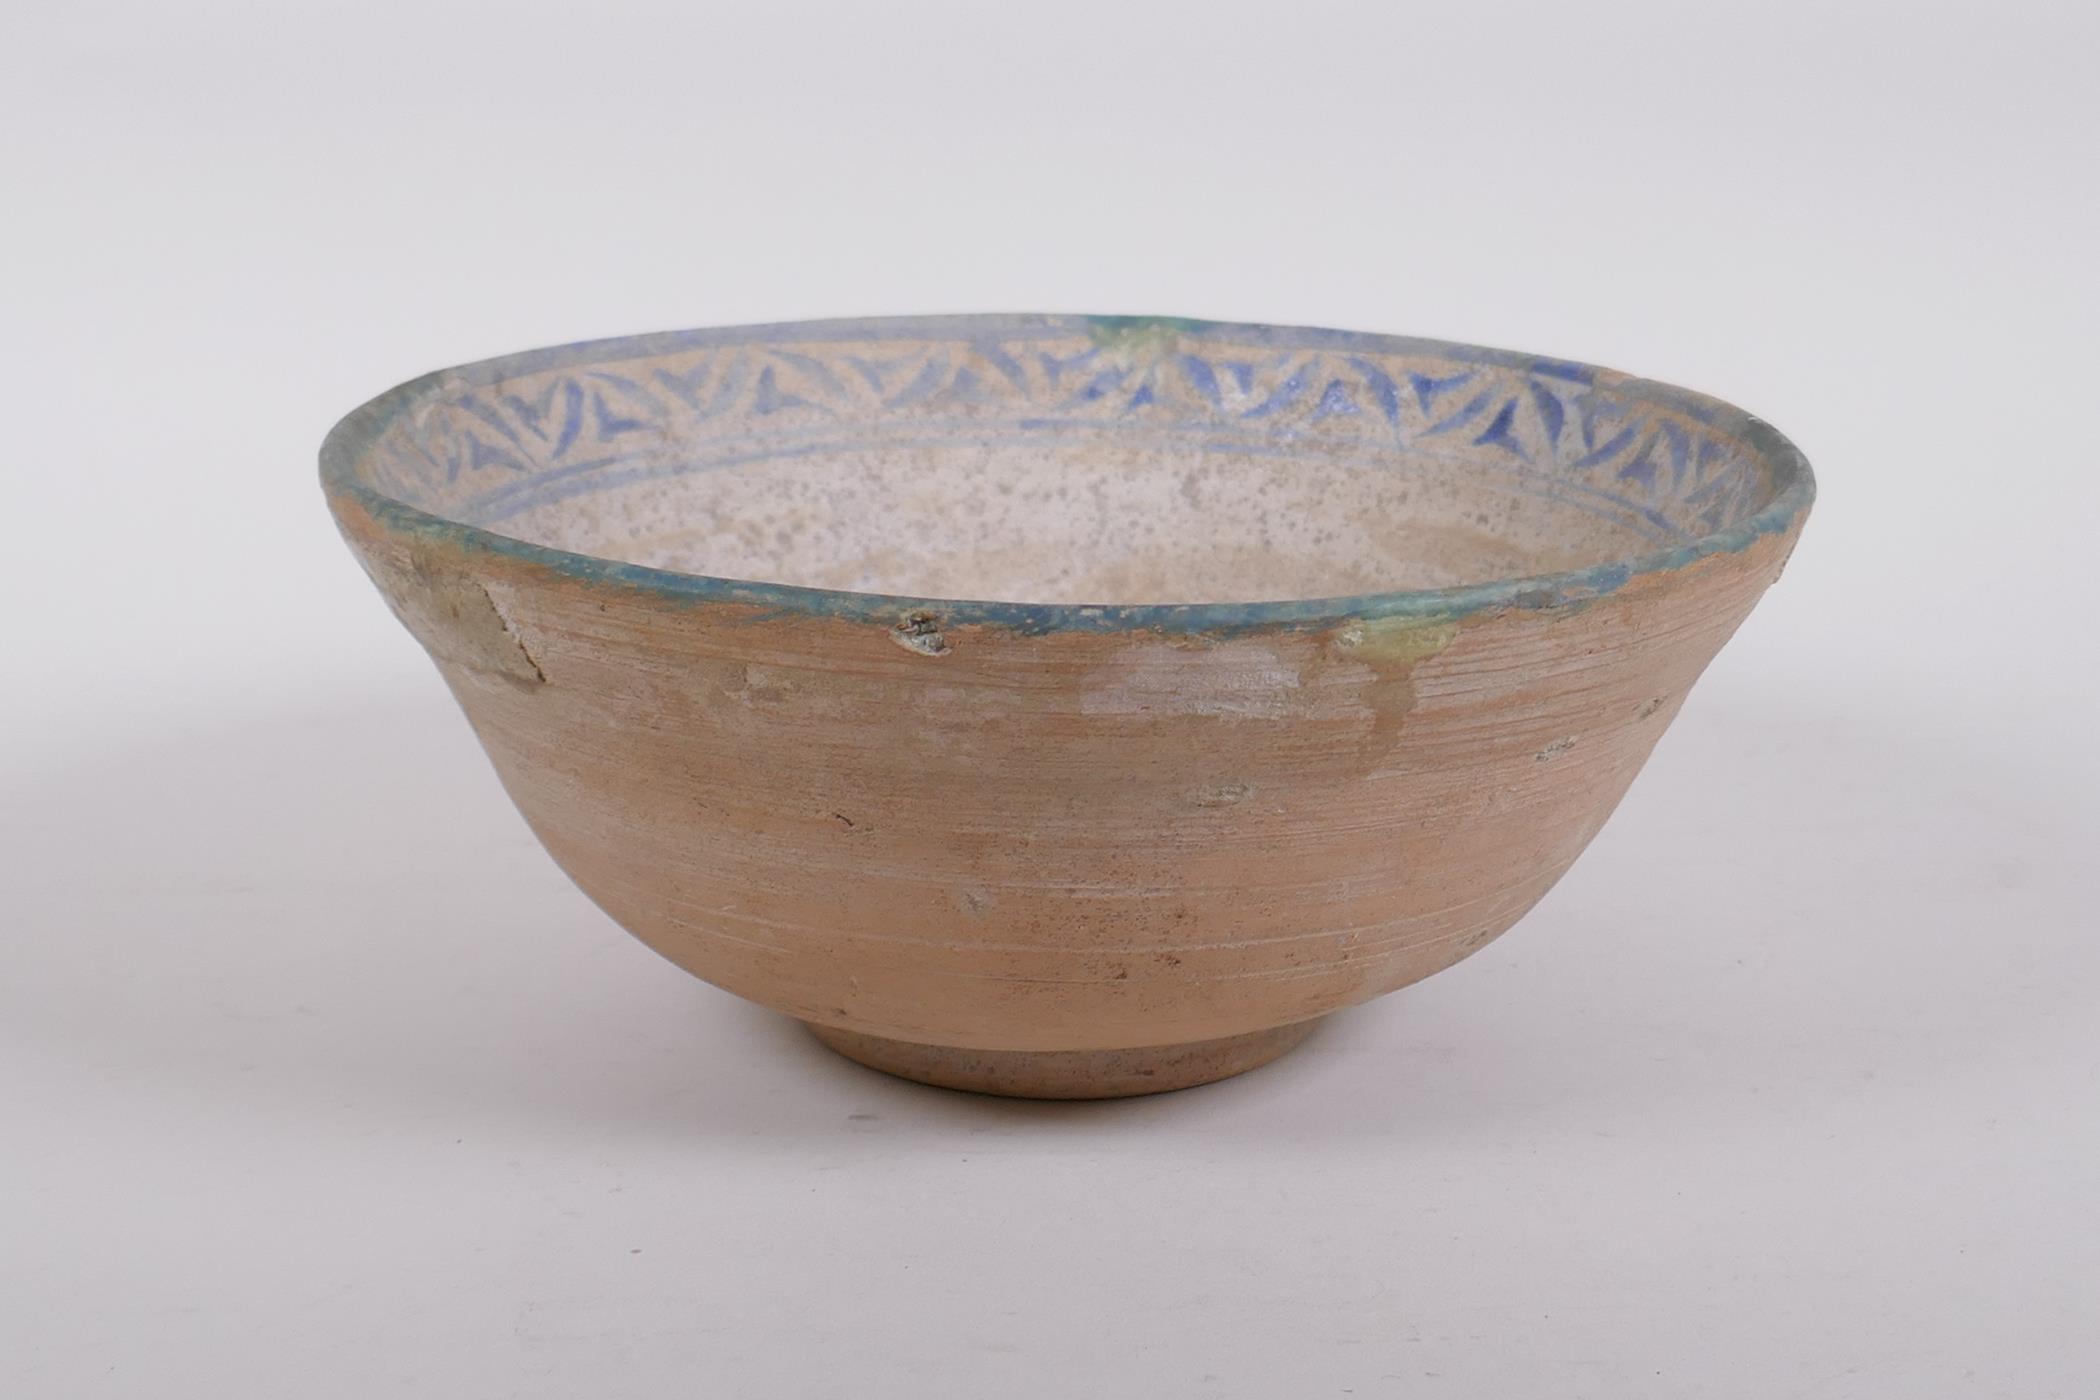 A middle eastern terracotta bowl with blue and white glazed decoration to the interior, 20cm